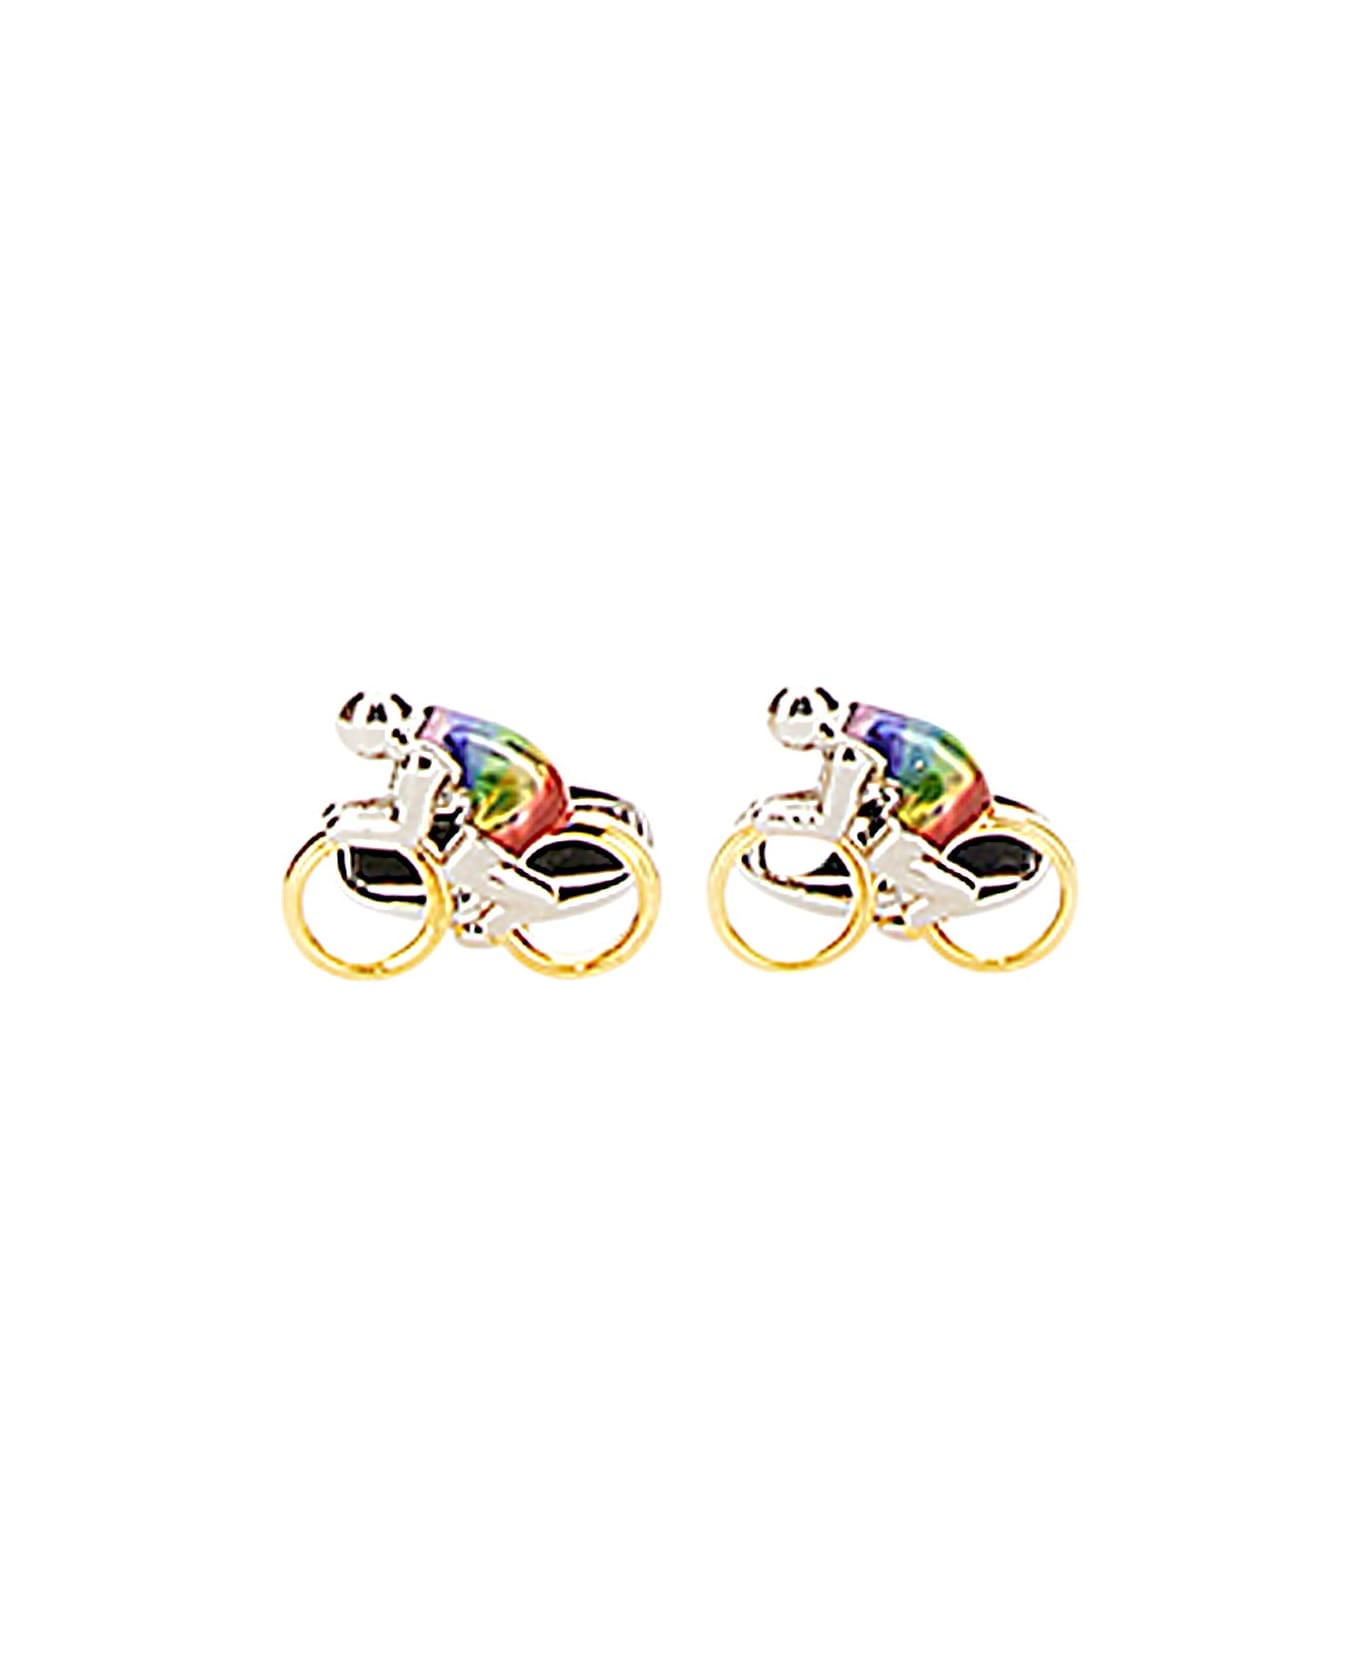 Paul Smith Cycle Twins - MULTICOLOR